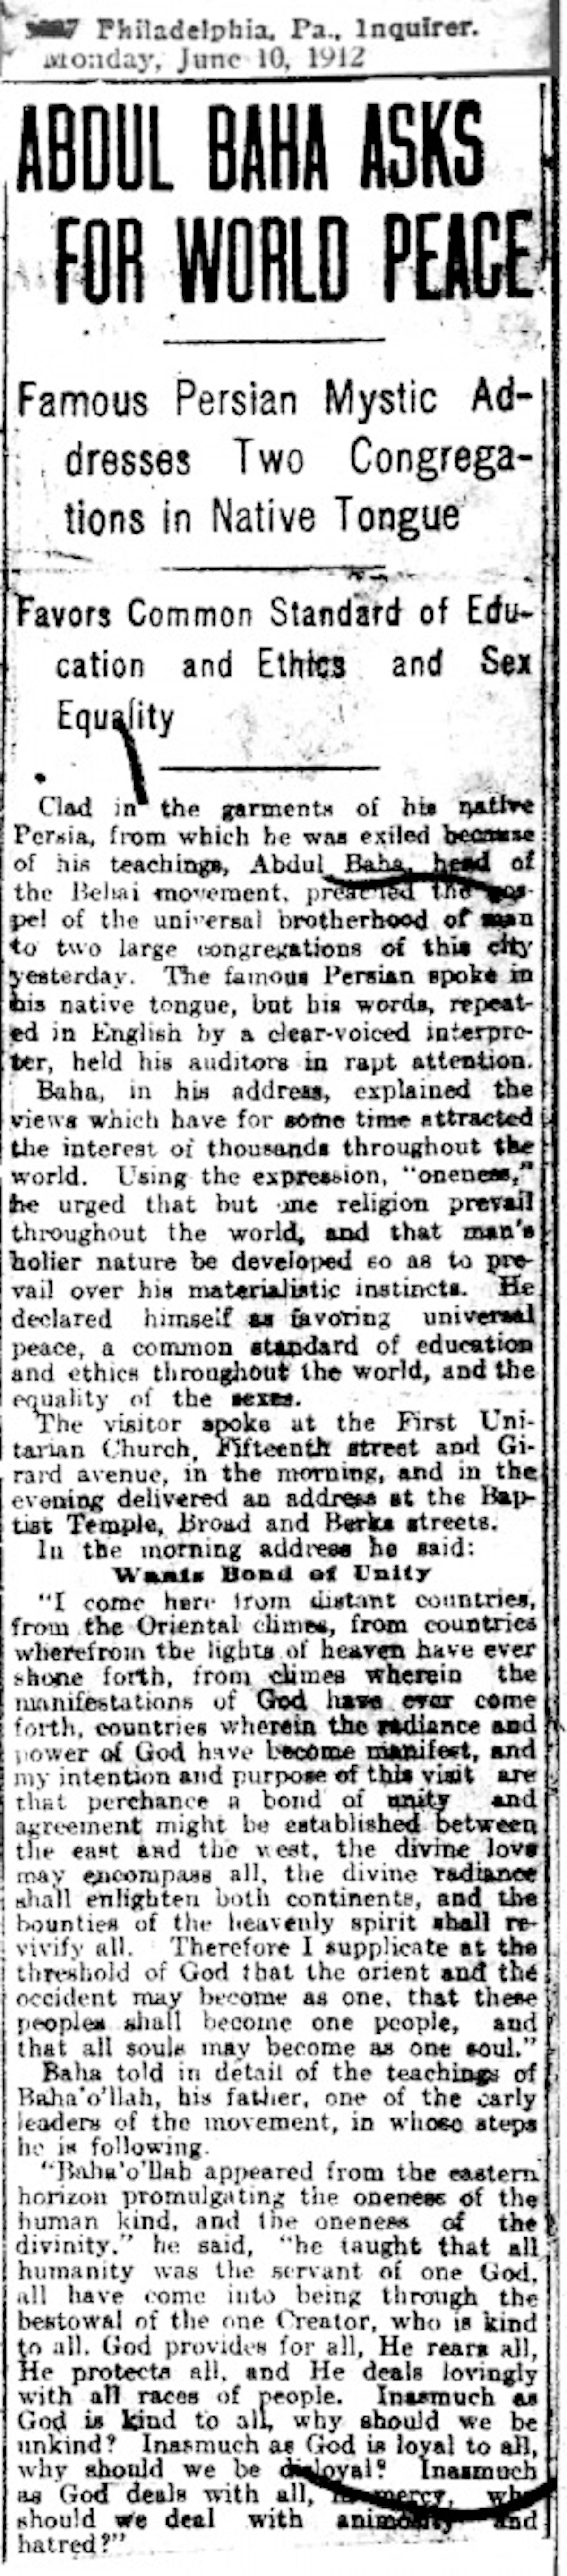 The Philadelphia Inquirer reported on 10 June 1912 about two talks ‘Abdu’l-Baha delivered the previous day.